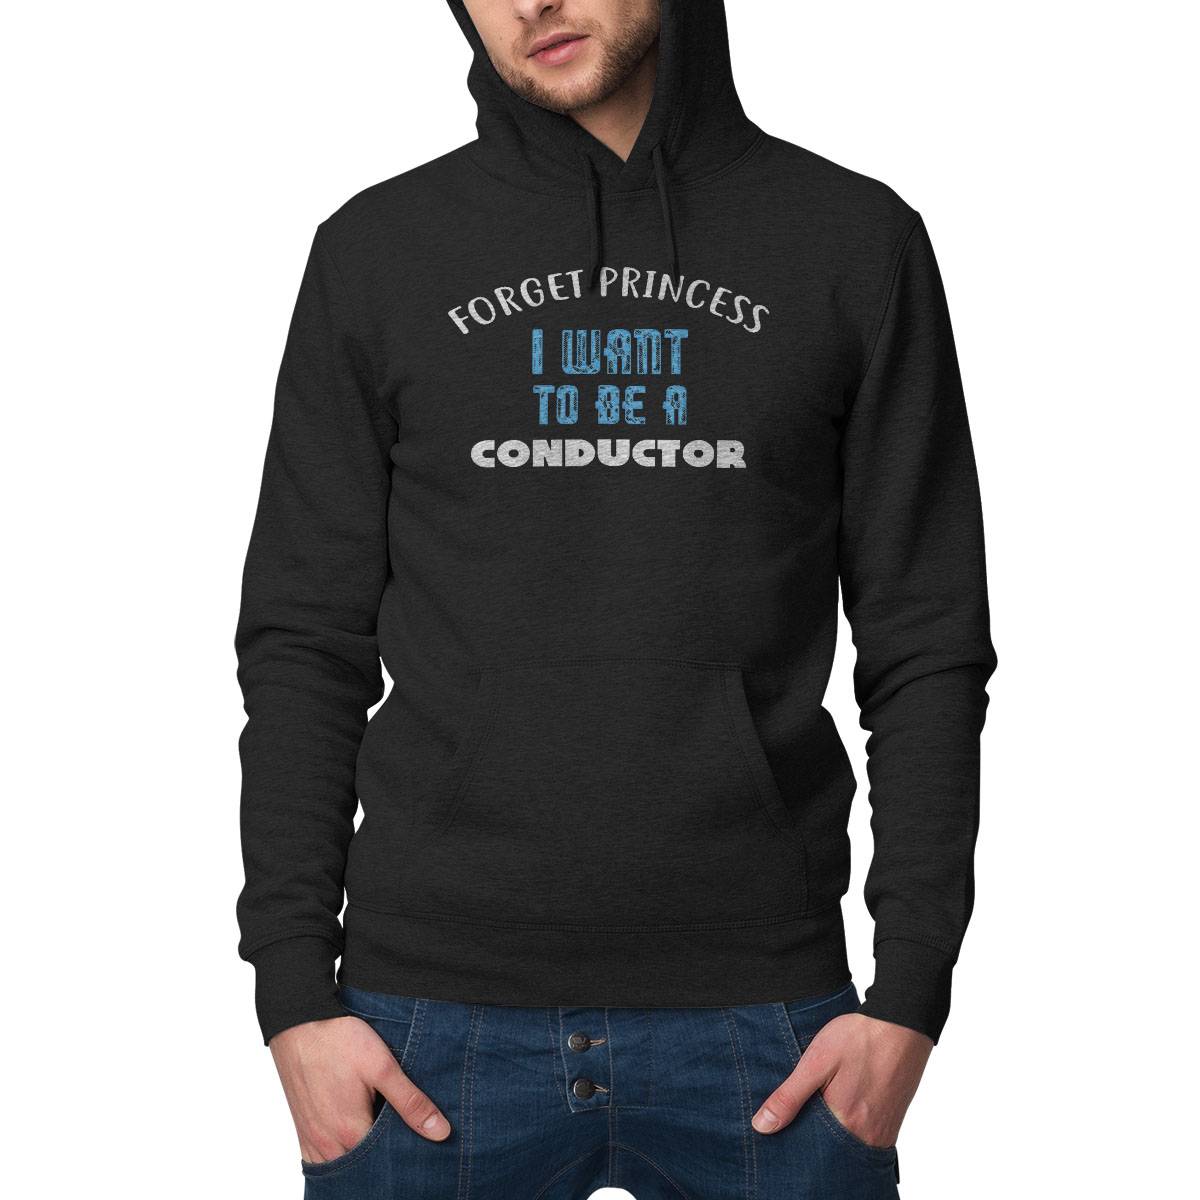 Forget Princess I Want To Be A Conductor T-Shirt